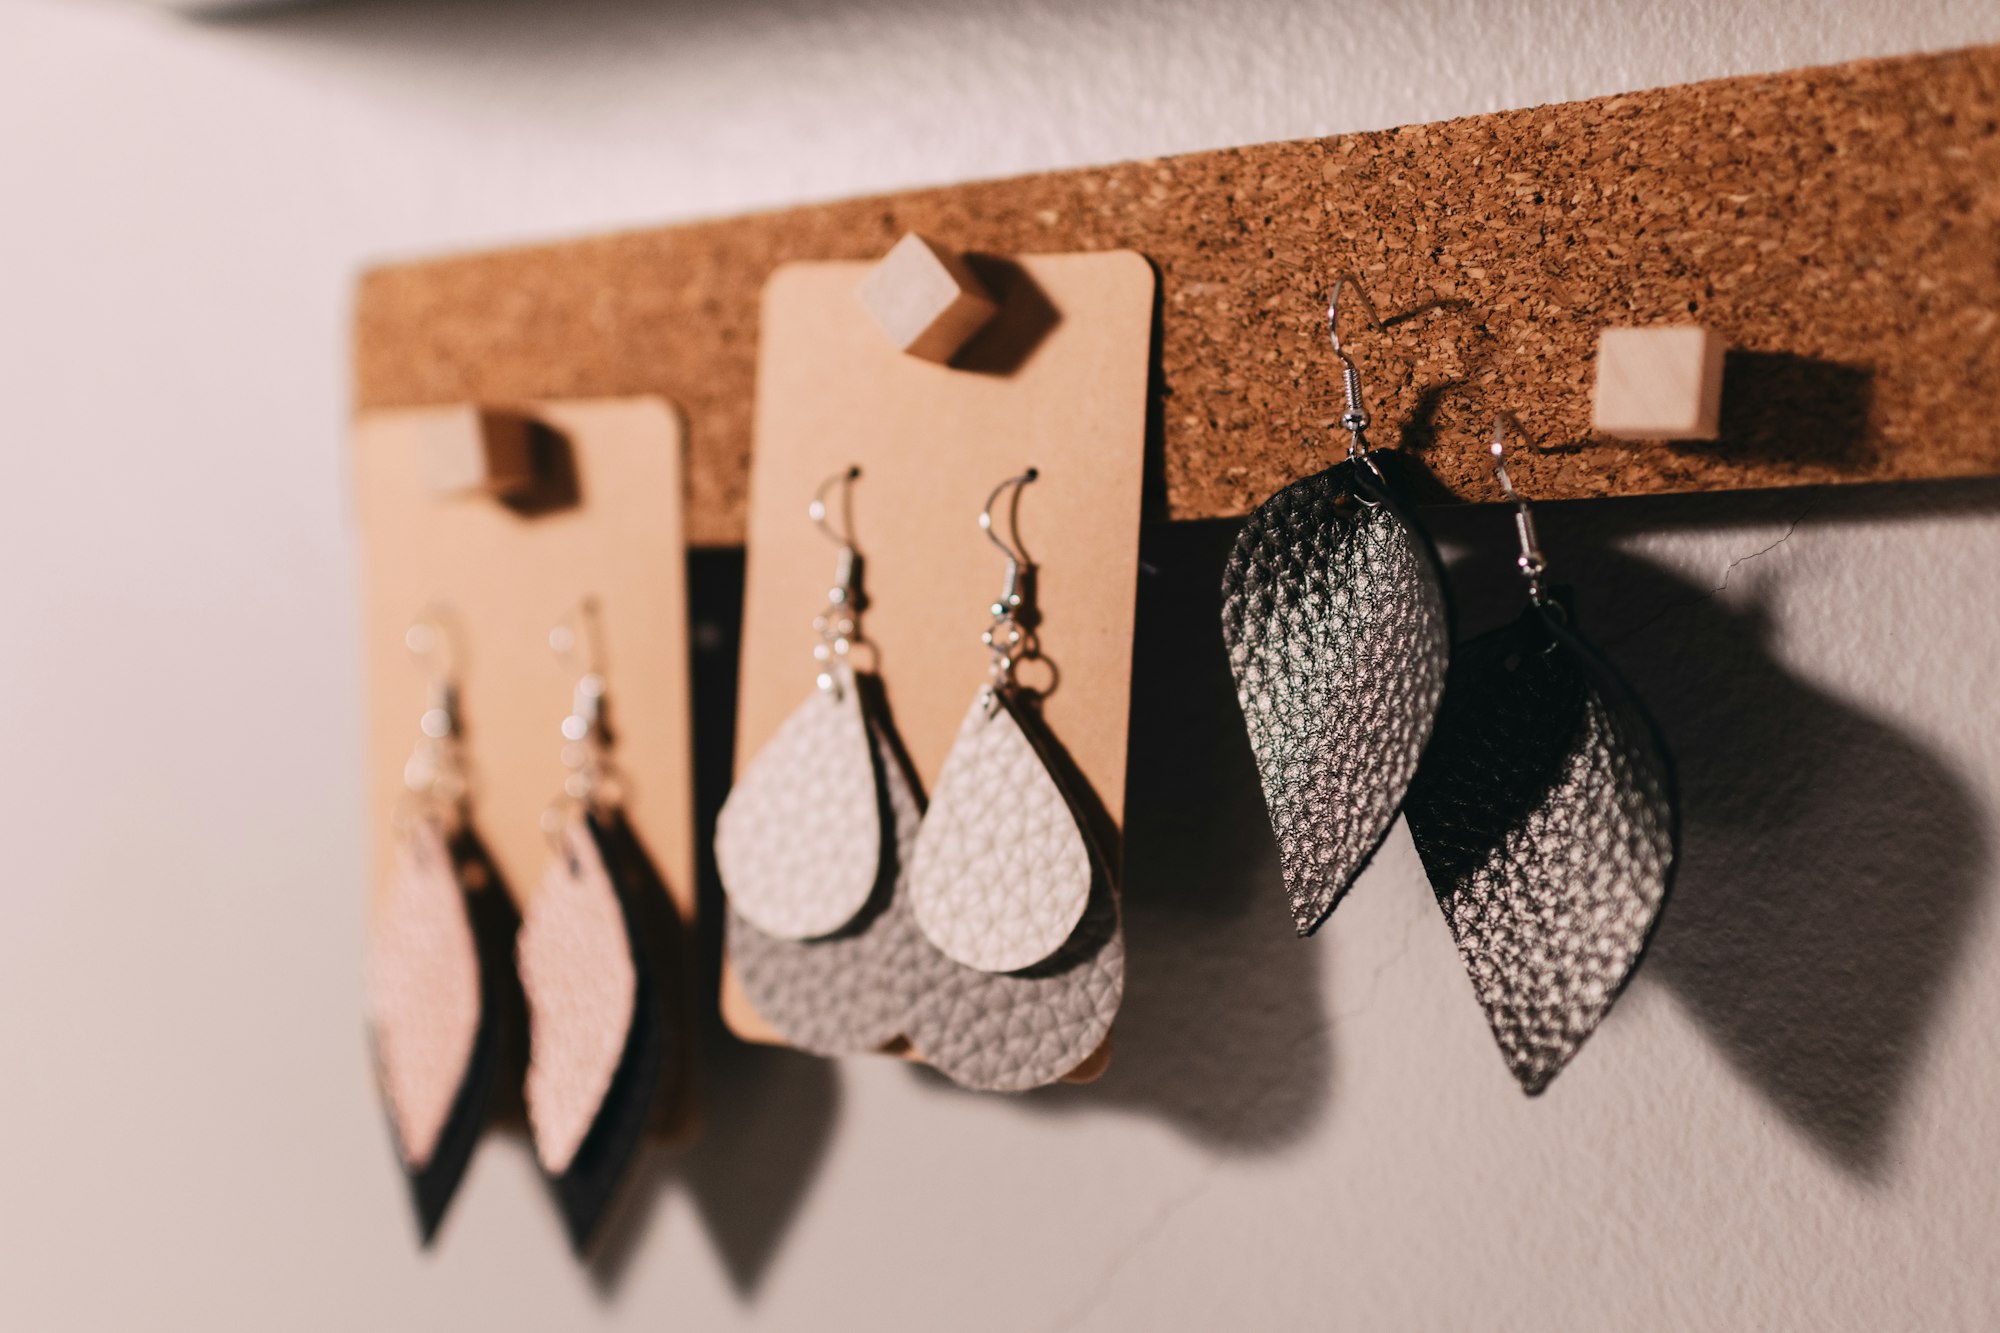 Leather earrings hanging together on a cork strip